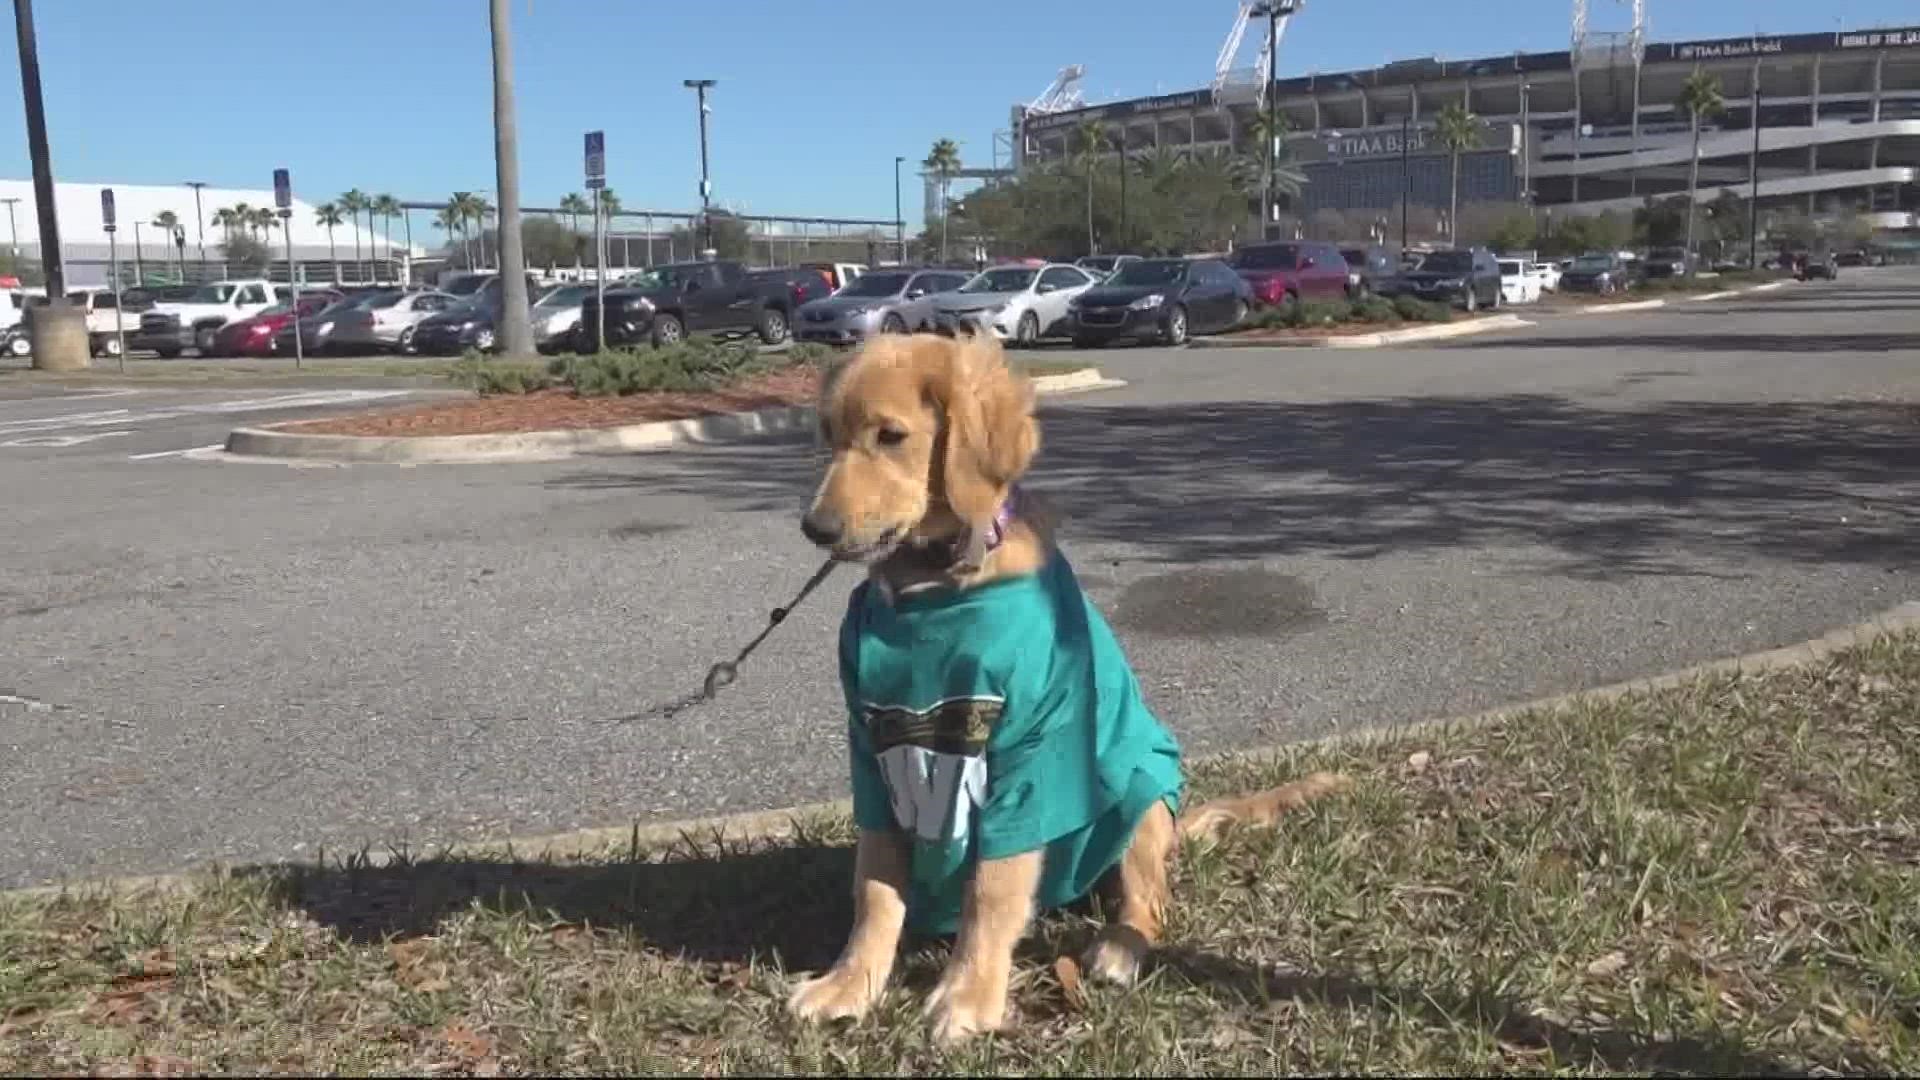 The watch party will be a chance for the future service dog to get comfortable around crowds and work on his response to loud noises.